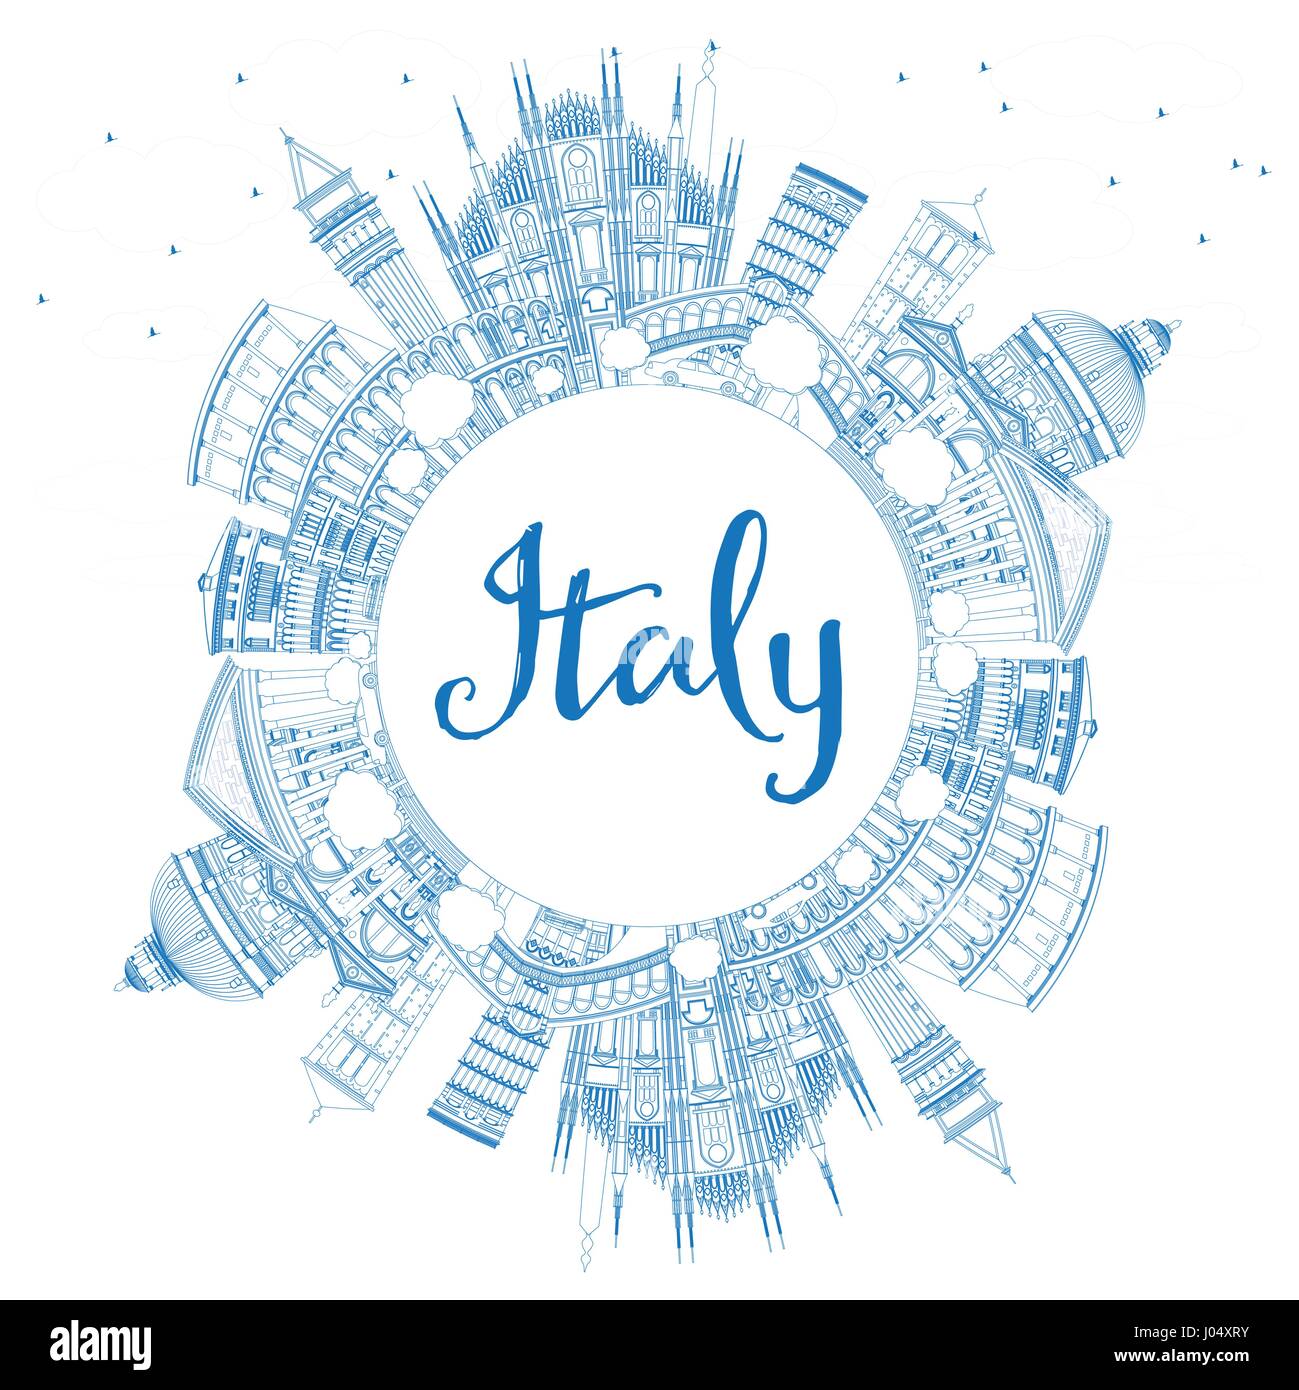 Outline Italy Skyline with Blue Landmarks and Copy Space. Vector Illustration. Business Travel and Tourism Concept with Historic Architecture. Stock Vector